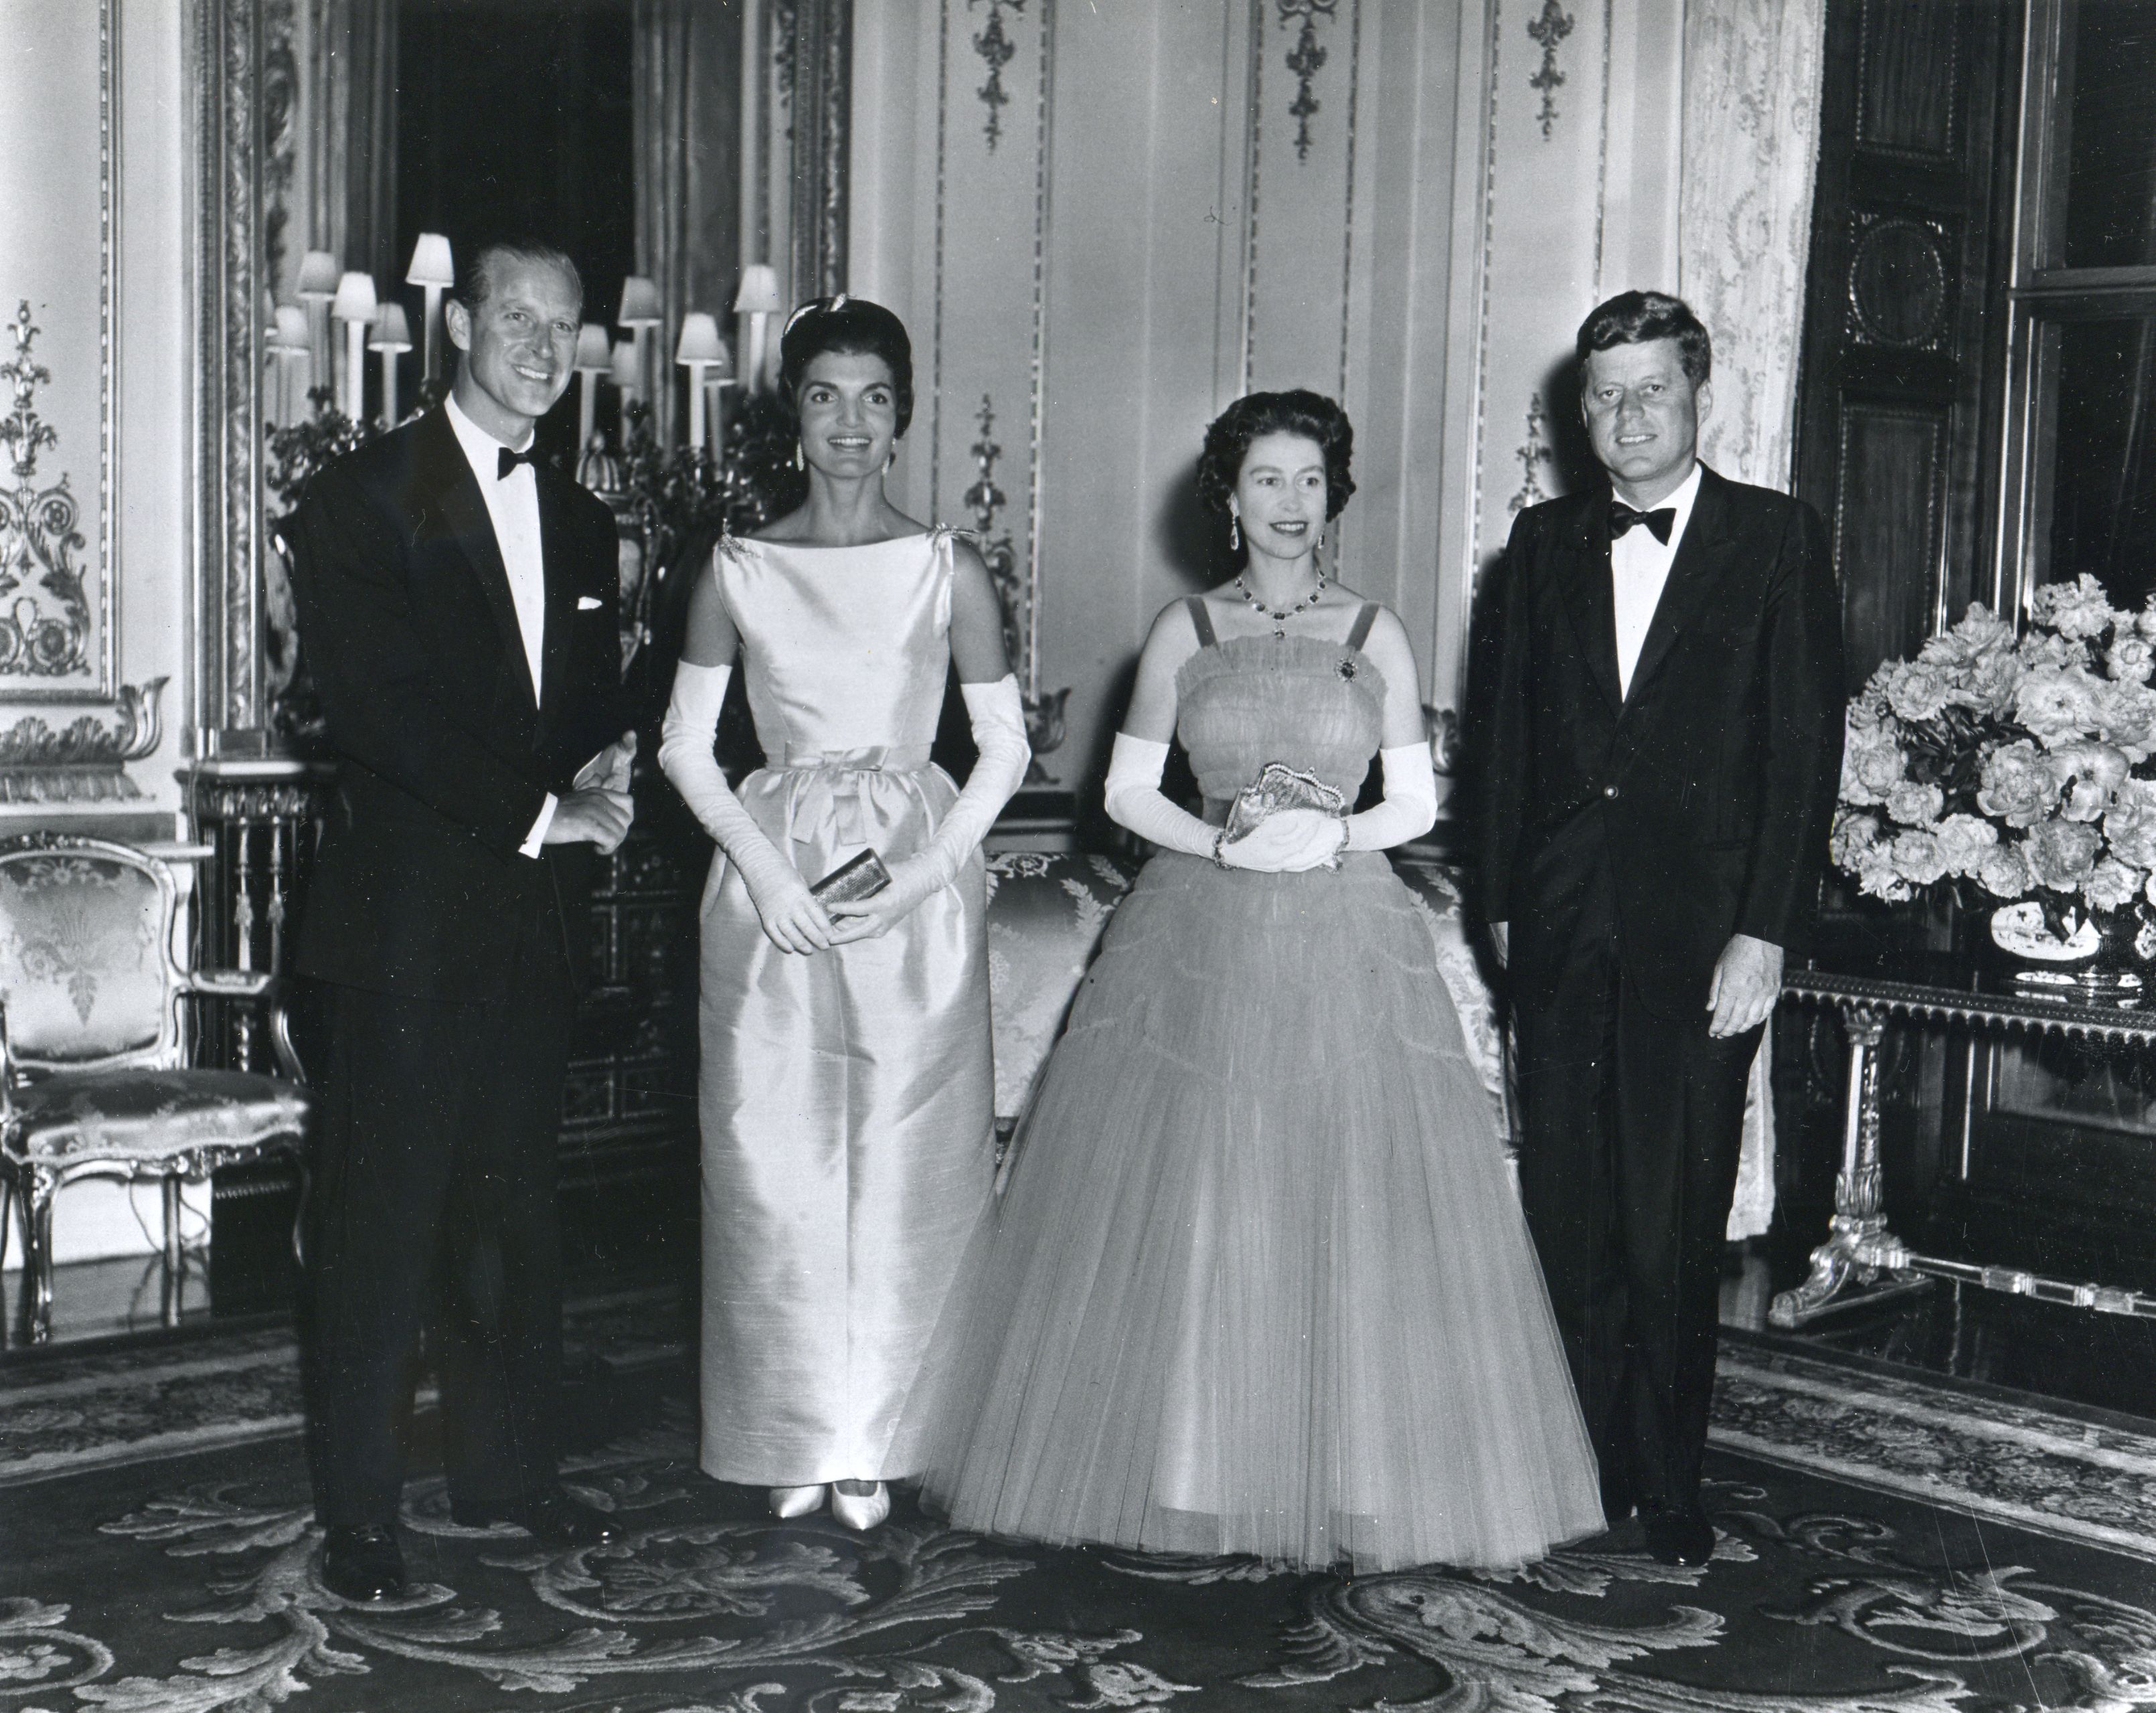 Queen Elizabeth and Prince Philip with President John F. Kennedy and his wife, First Lady Jacqueline Kennedy in 1961 in London, United Kingdom | Source: Getty Images